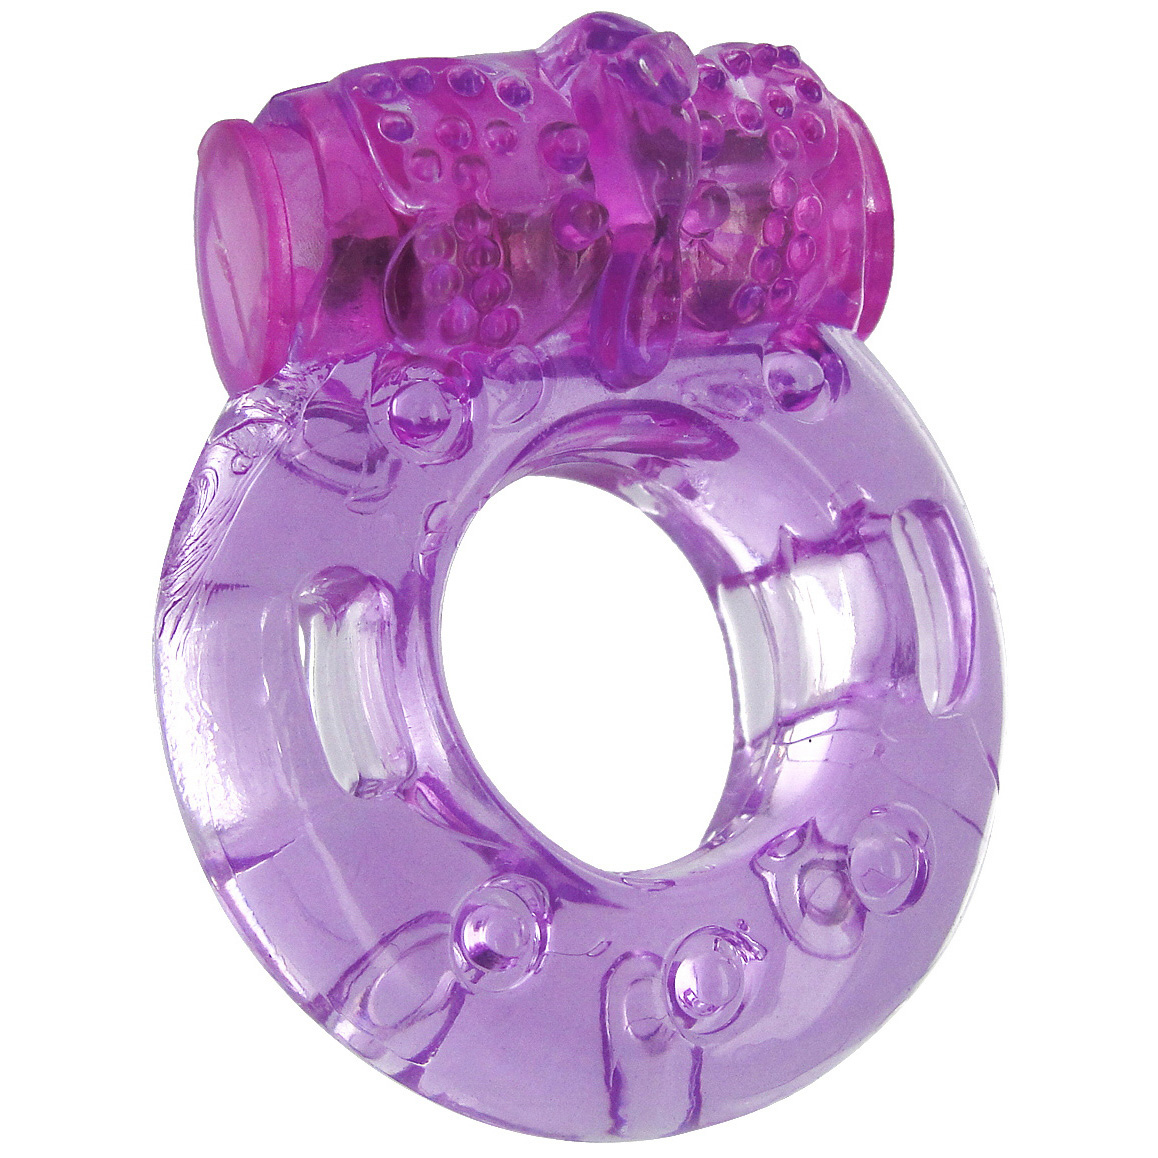 Purple Orgasmic Vibrating Cockring – Packaged